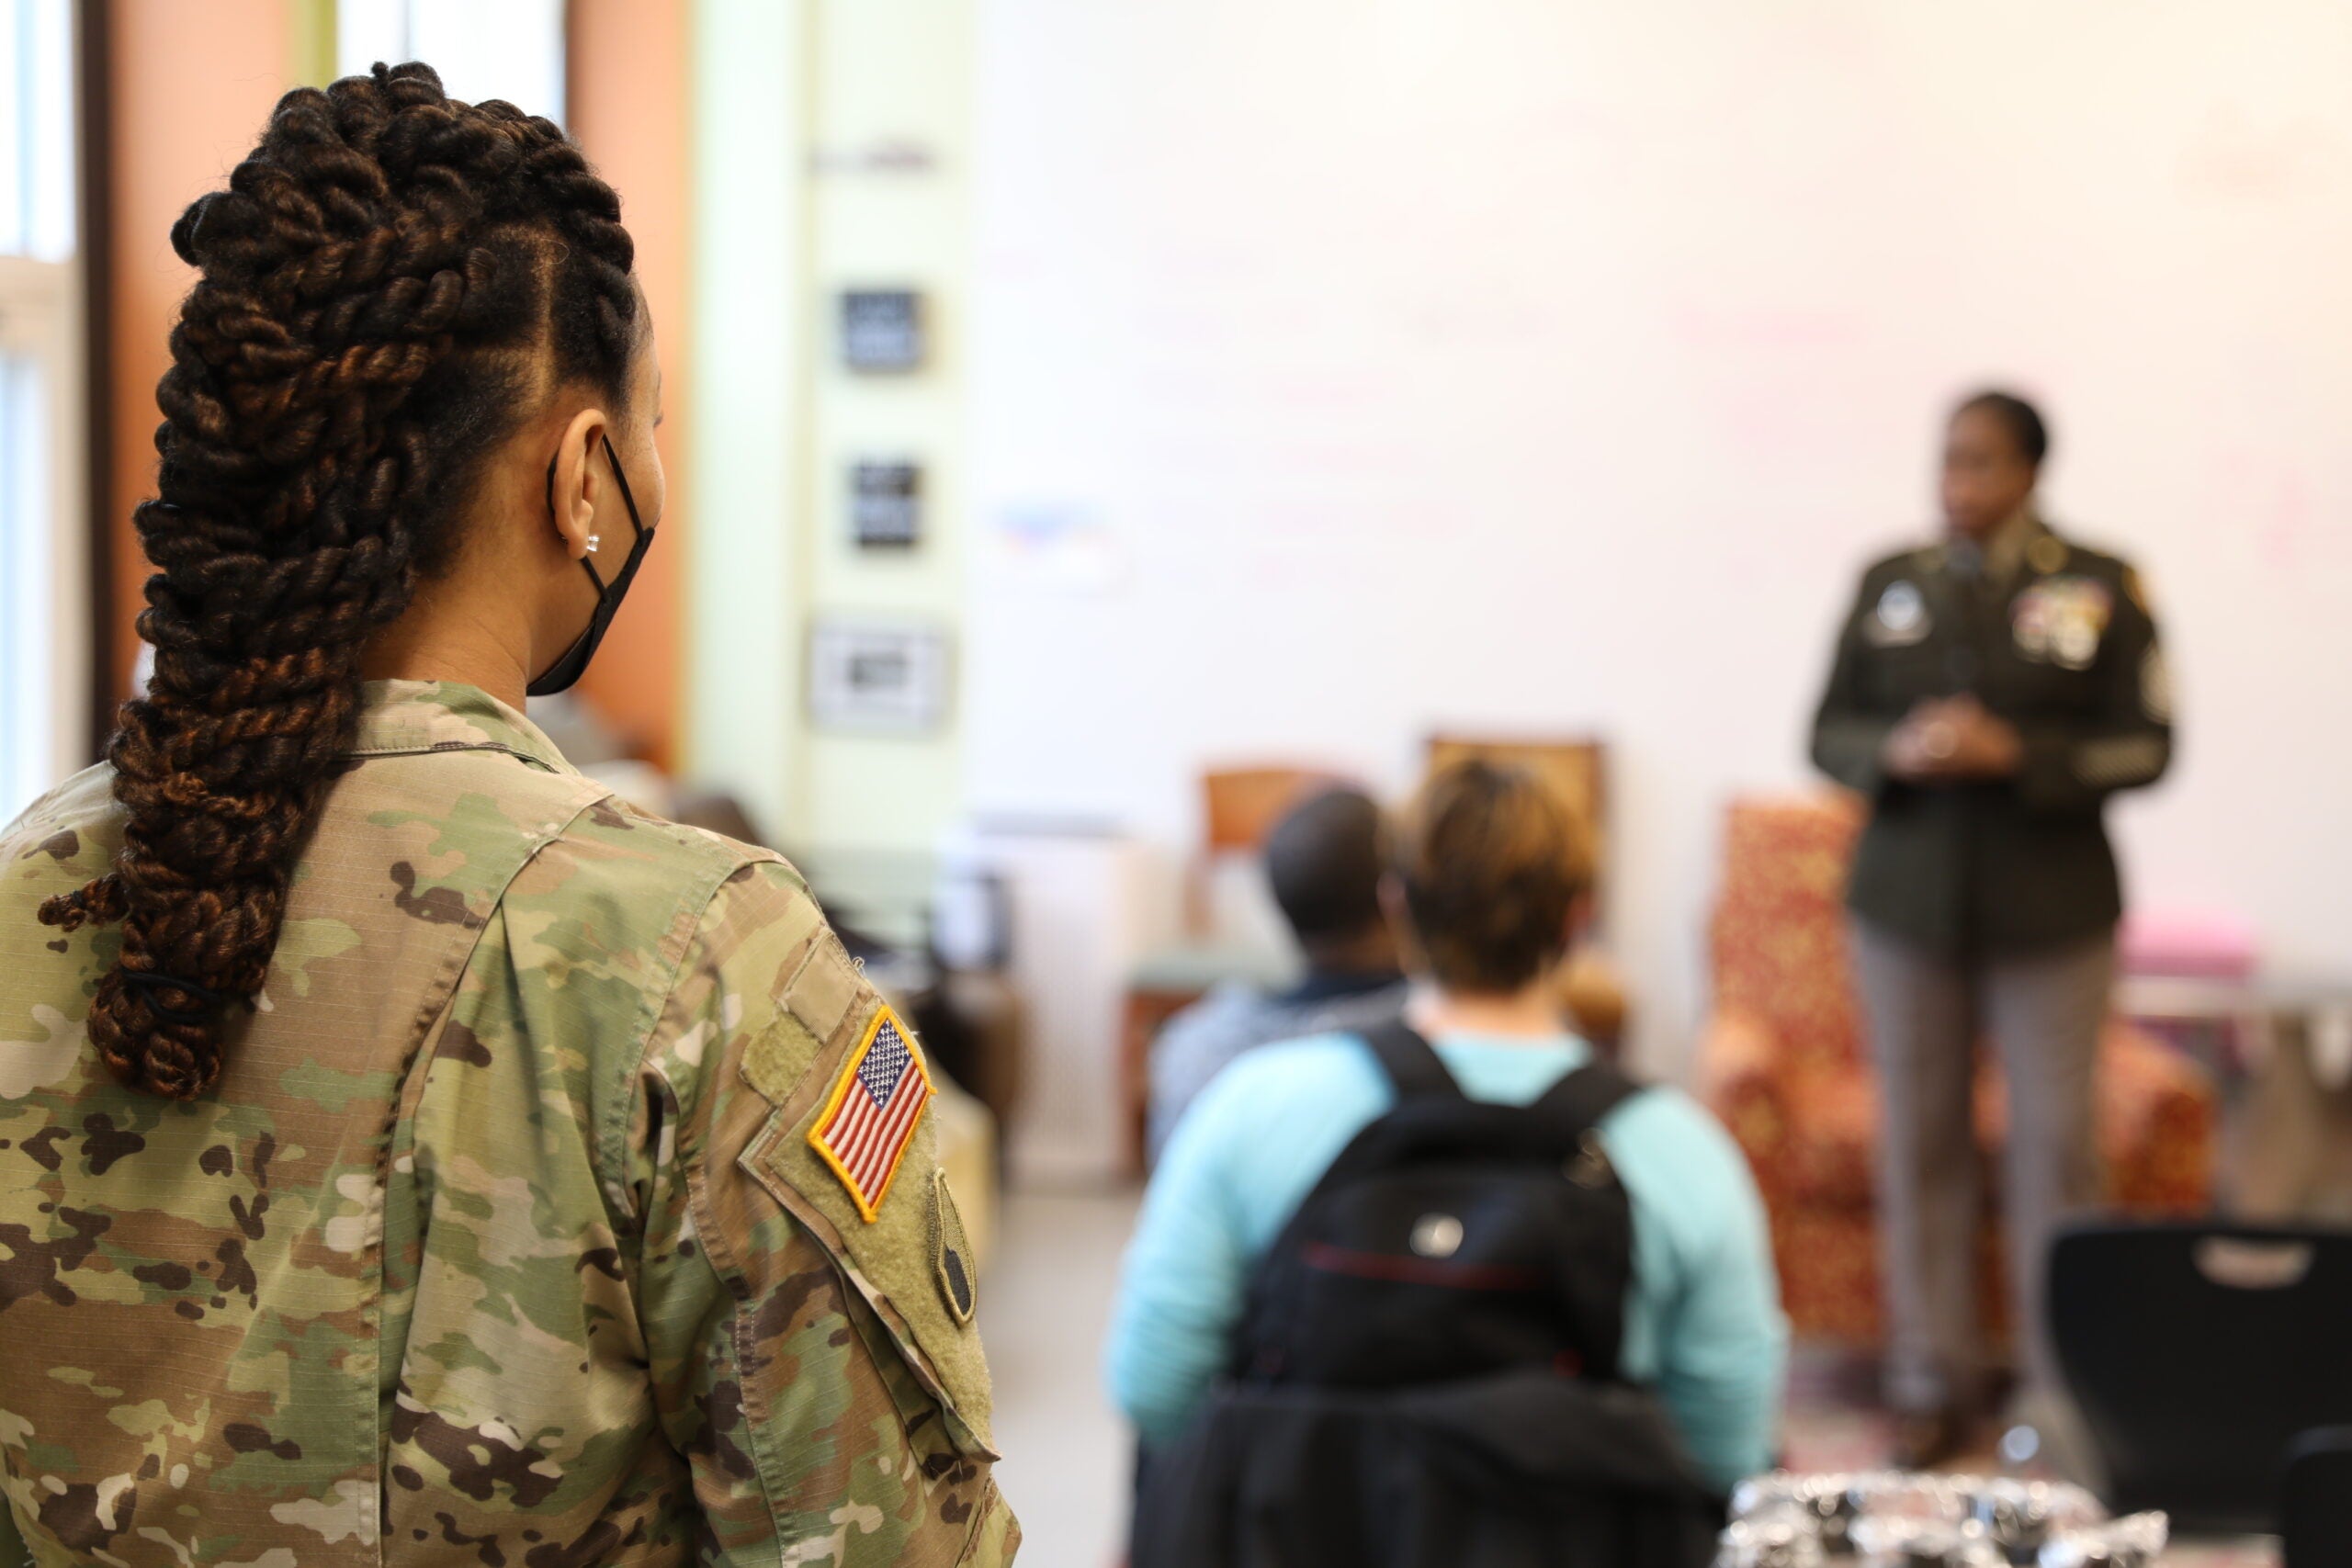 Staff Sgt. Devera Arnwine, recruiting and retention noncommissioned officer, Maryland Army National Guard, looks on as Command Sgt. Maj. Perlisa Wilson, senior enlisted leader of the Maryland National Guard, speaks to students about benefits and career opportunities in the MDNG at City Neighbors High School in Baltimore on April 7, 2022. Arnwine's area of operation for recruiting is in Baltimore. (U.S. Army National Guard photo by Staff Sgt. Chazz Kibler)